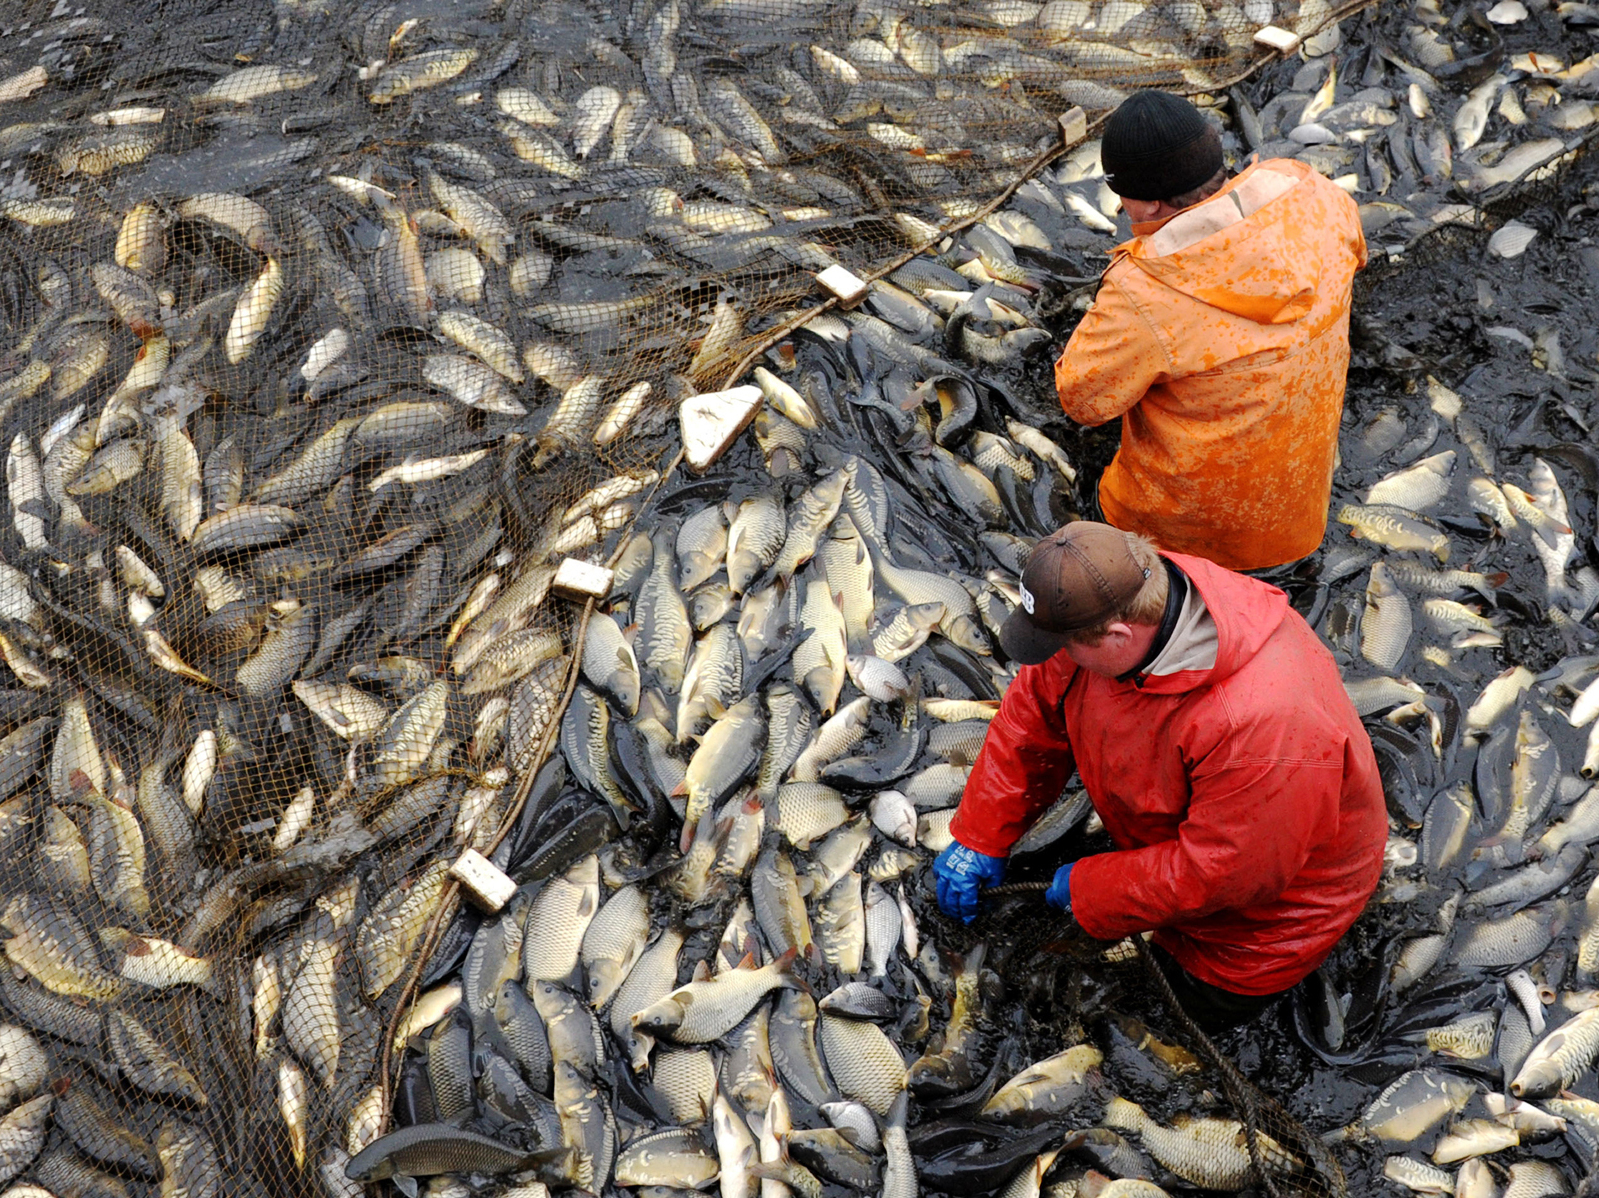 Carp are collected at a breeding farm near the Belarus village of Ozerny in November 2013. Researchers say there's a lot the aquaculture industry can do to be more efficient. Photo: Viktor Drachev/AFP/Getty Images